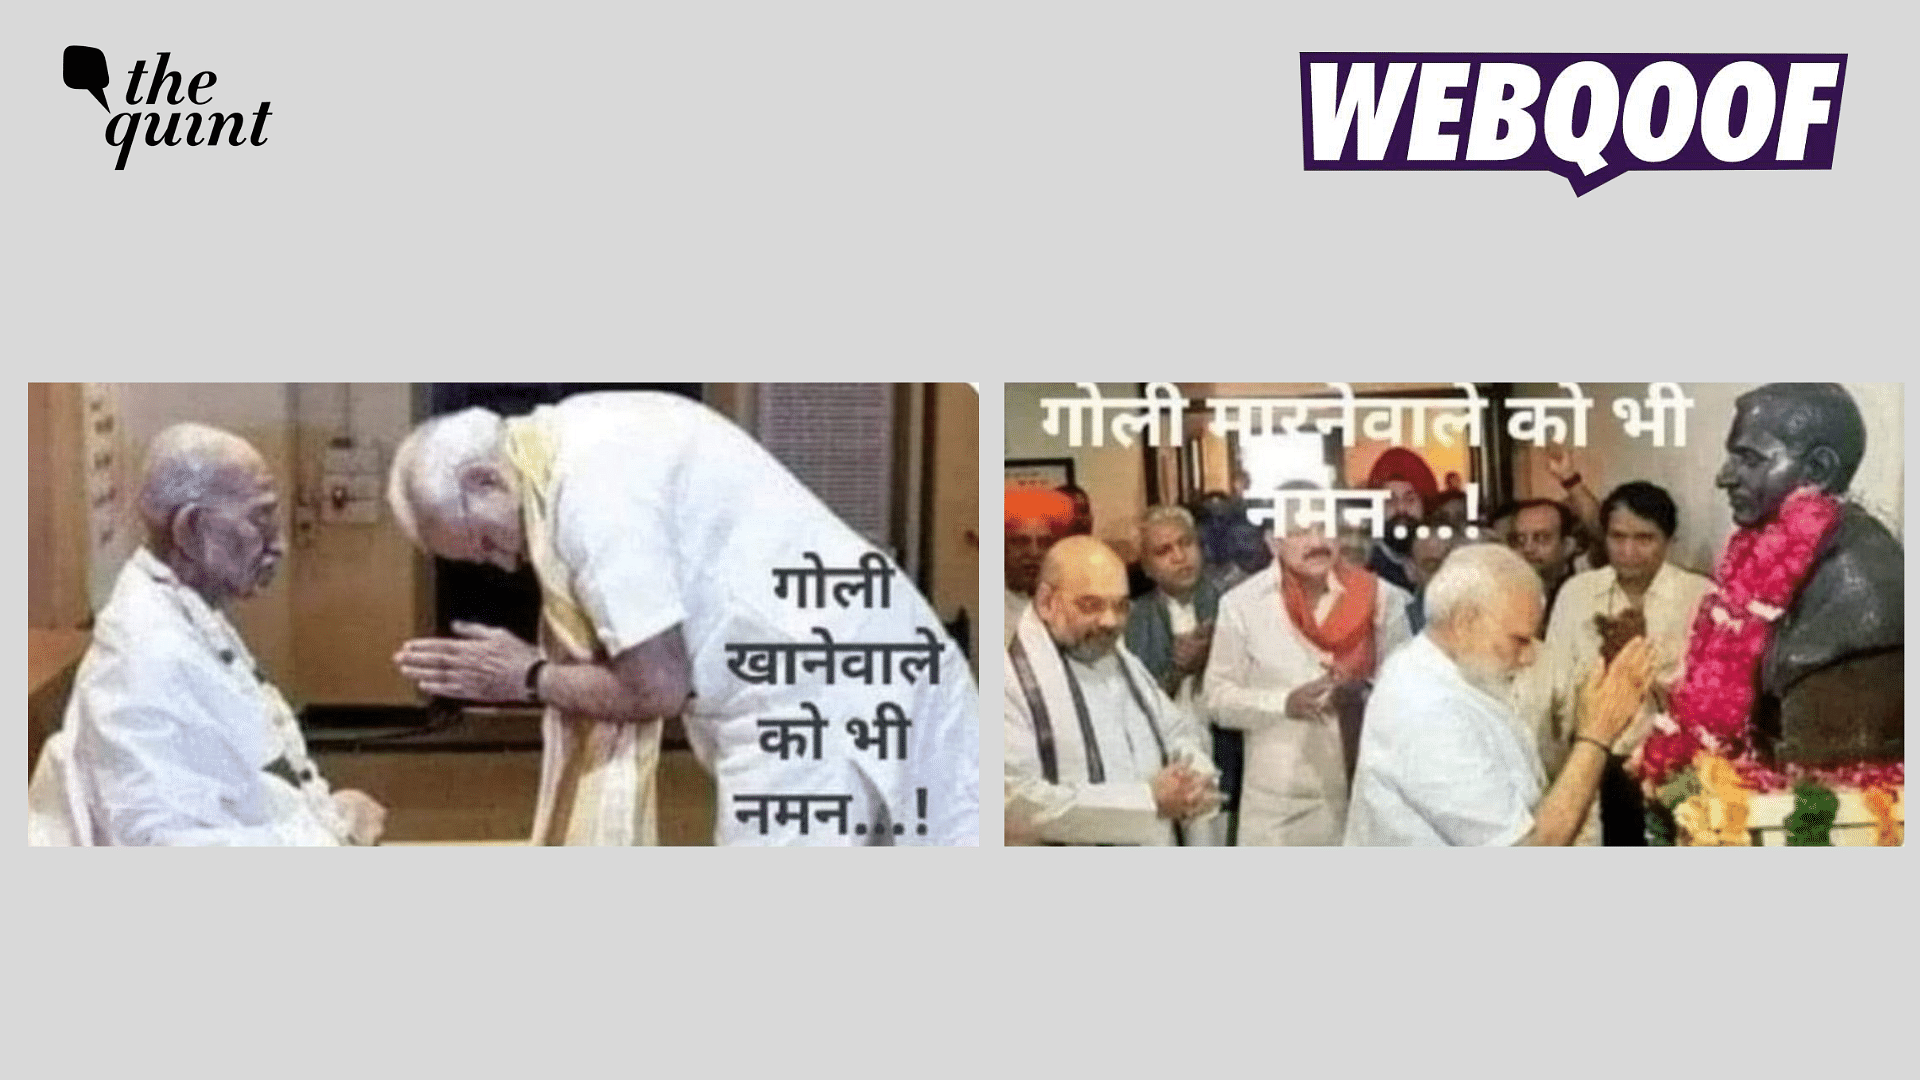 <div class="paragraphs"><p>Fact-check: The photo shows PM Modi paying his respects to Mahatma Gandhi and Deen Dayal&nbsp;Upadhyaya.&nbsp;</p></div>